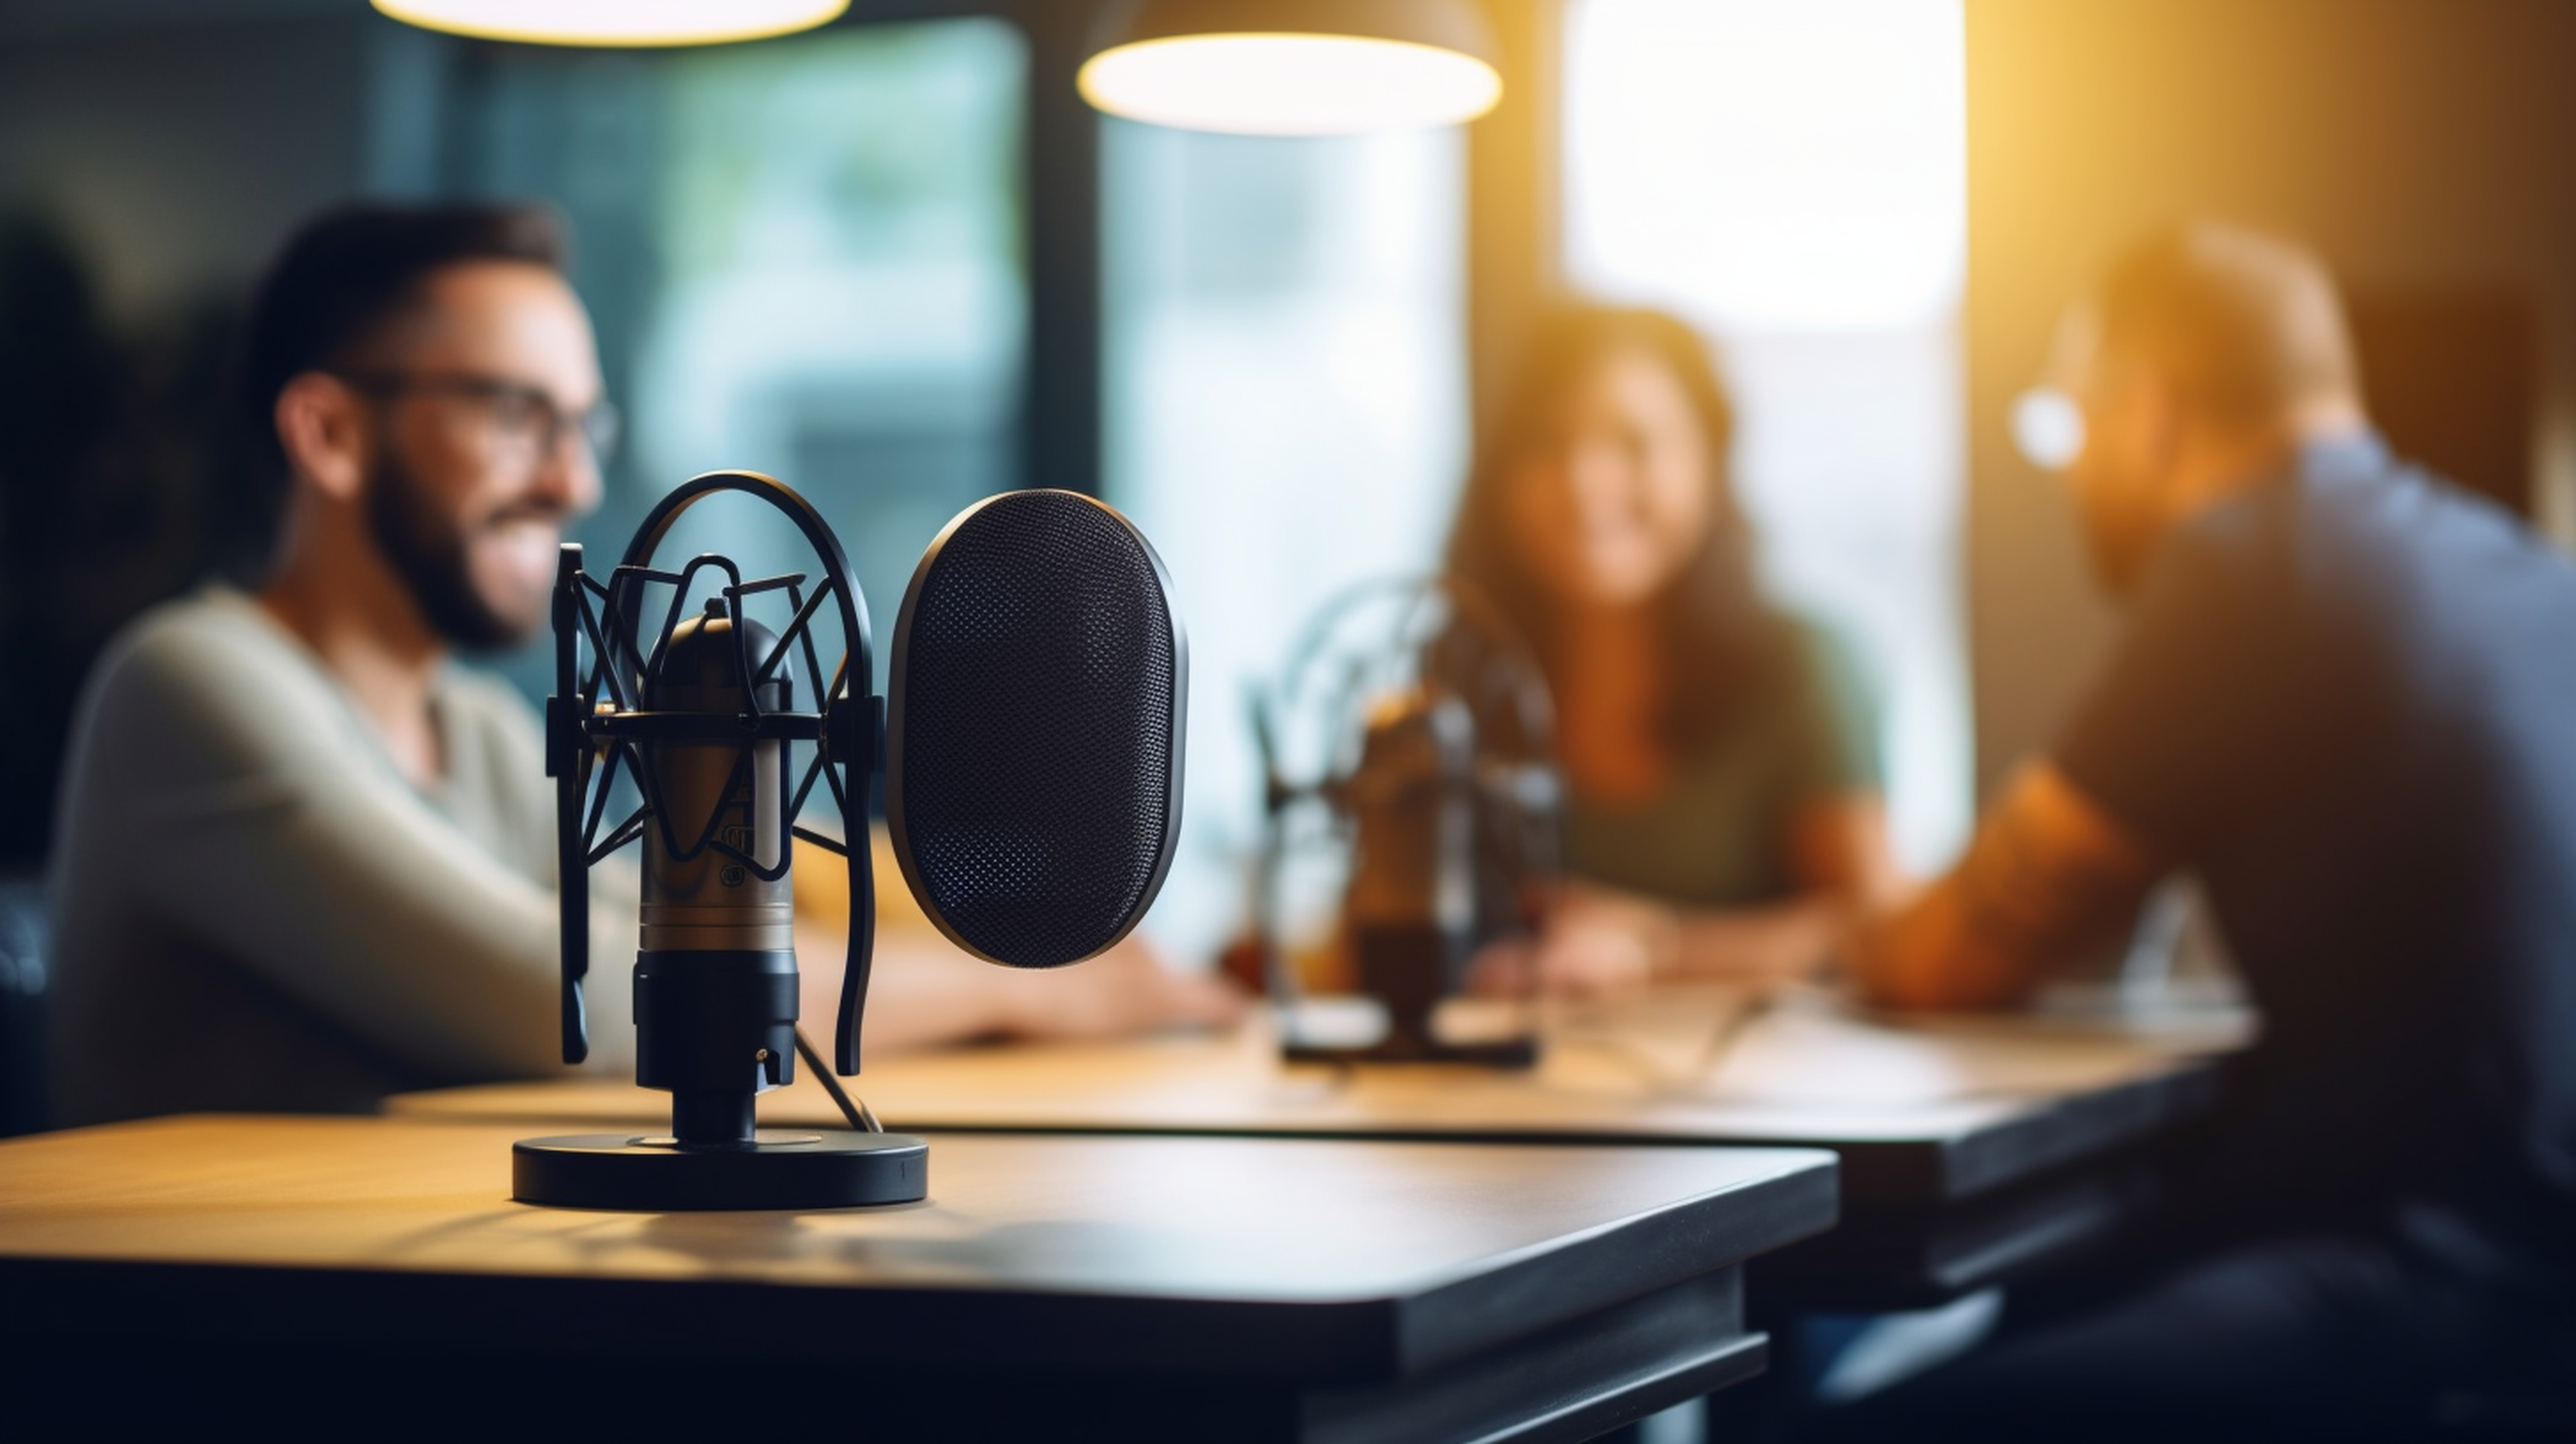 3 Steps for Podcast Growth: Insights from Christian Podcasting Expert Andrew Rappaport